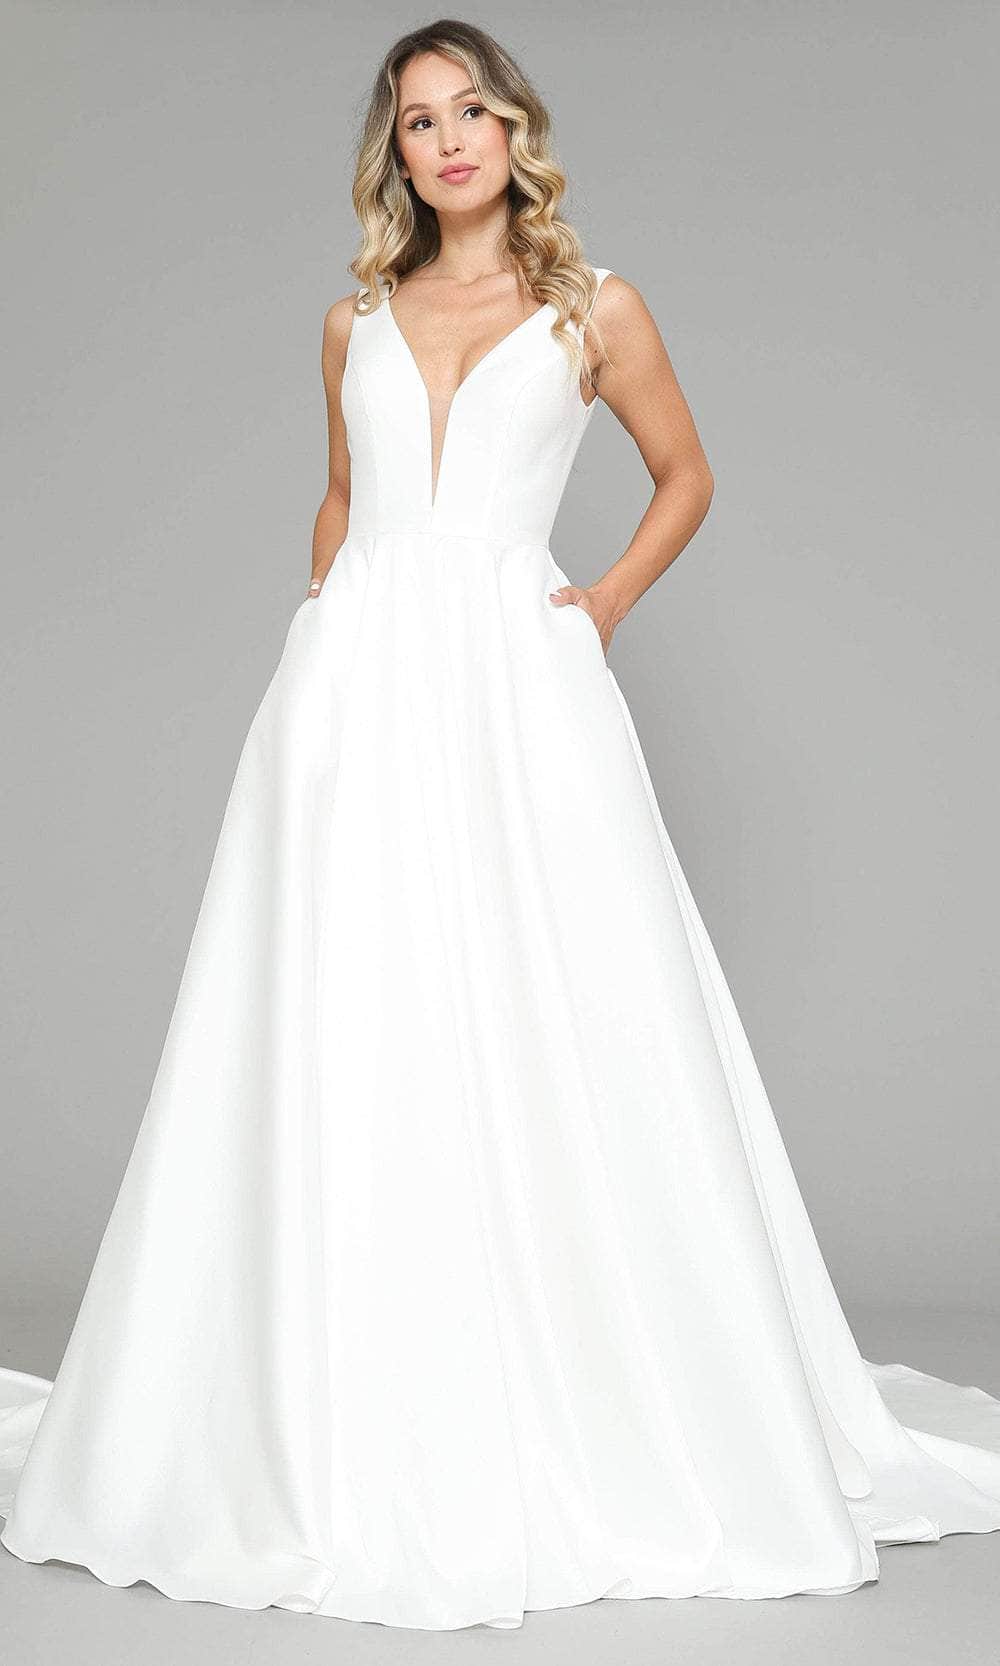 Image of Poly USA 8582 - Sleeveless V-Neck Bridal Gown